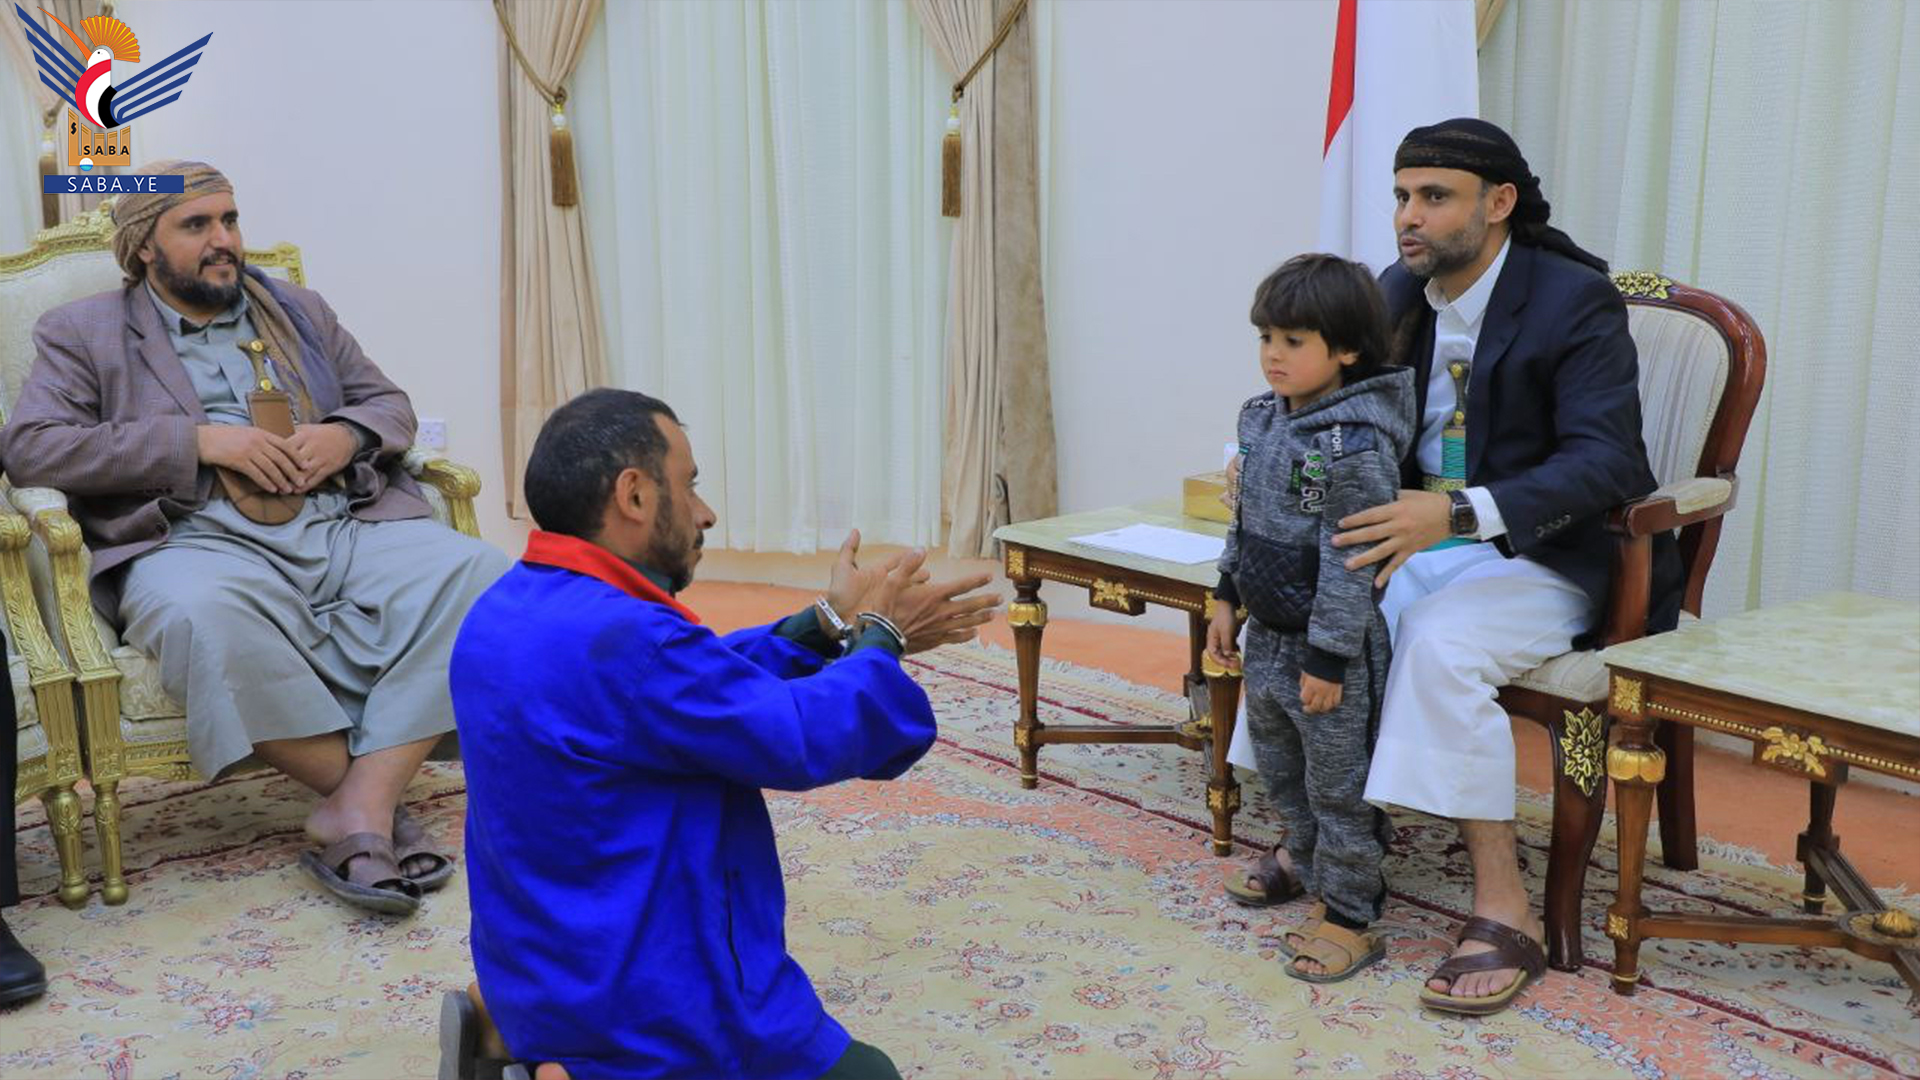 President Al-Mashat meets child's father who was assaulted by soldier in municipality